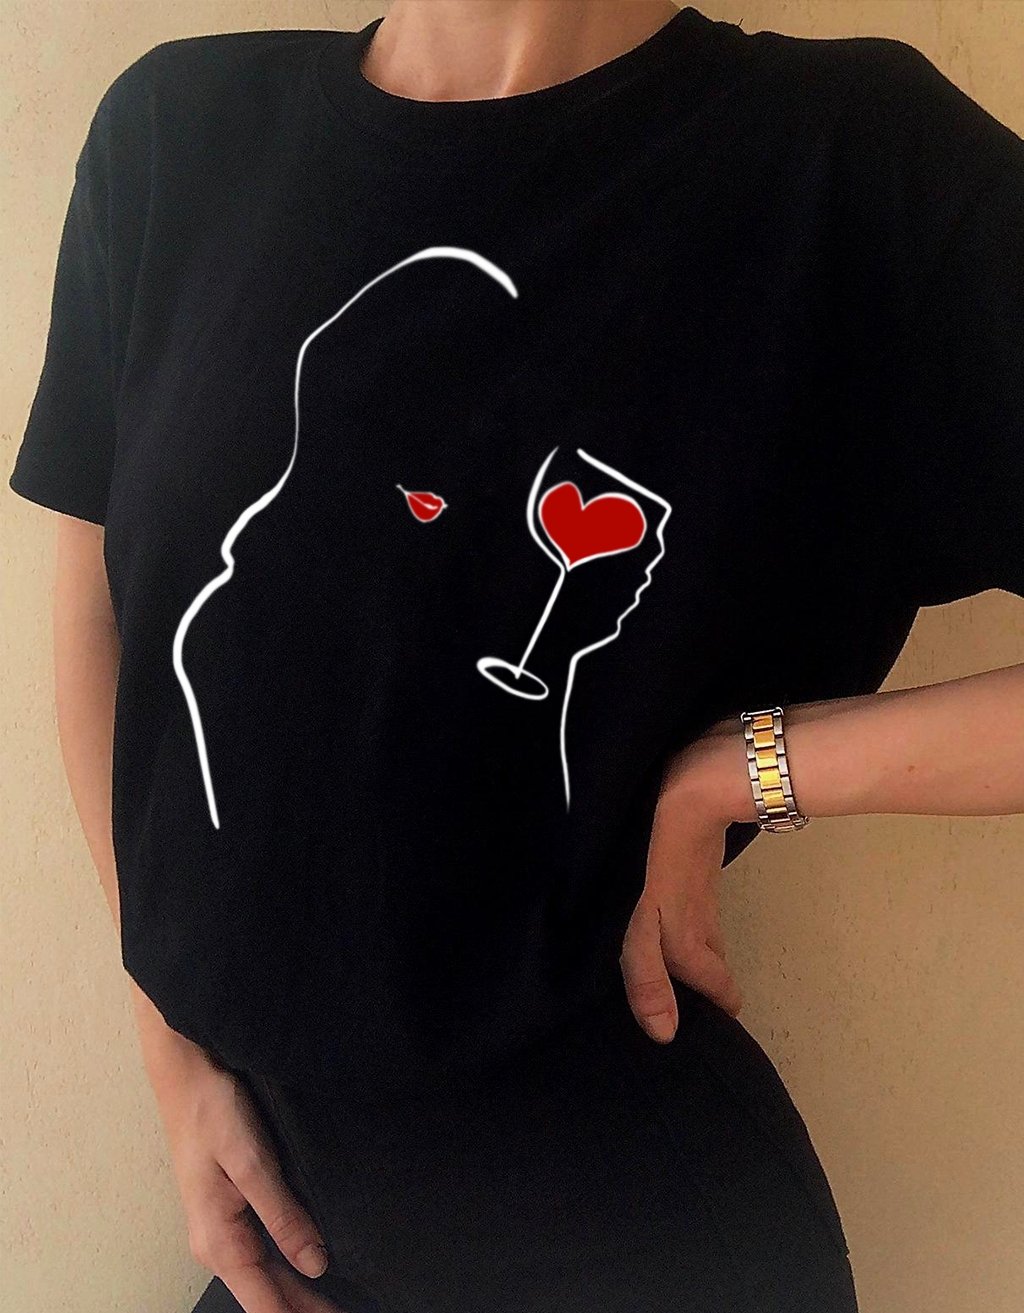 T-Shirt Donna "Better with wine" - dandalo